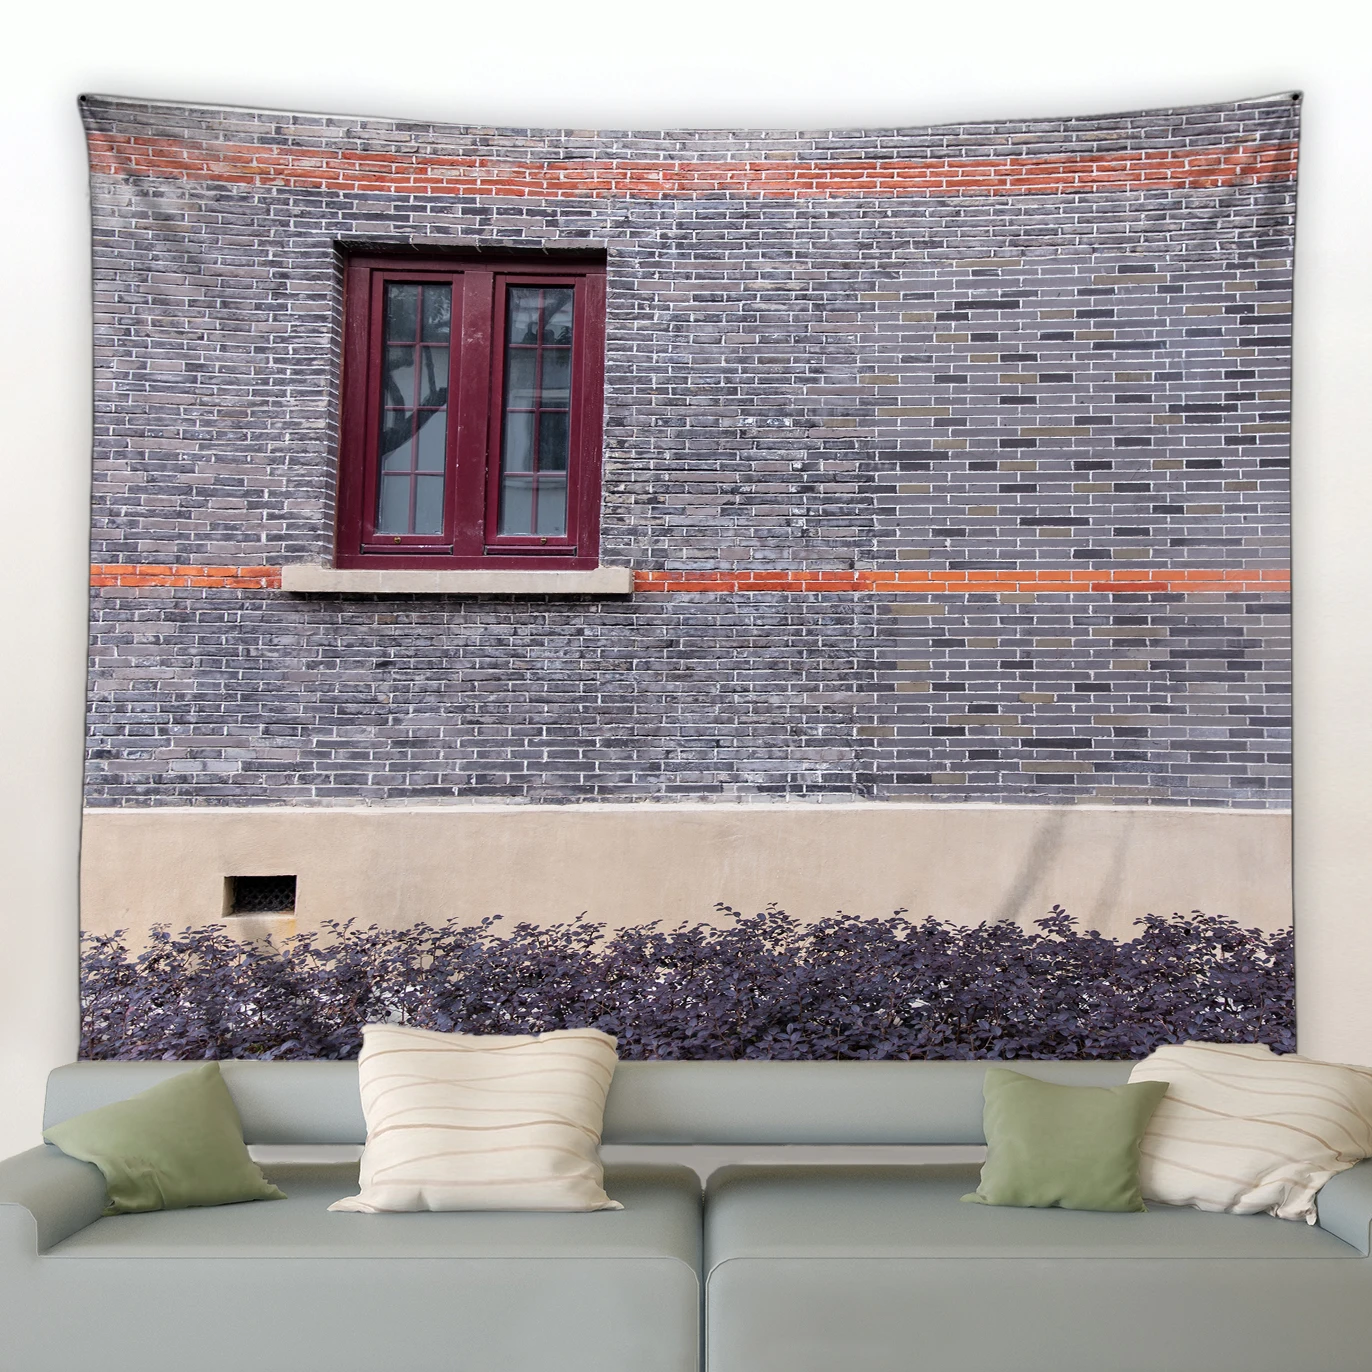 

Brick Wall Tapestry Wall Hanging Cloth Layout Room Dormitory Fabric Tapestries Painting Decoration Study Bedside Bedroom Blanket